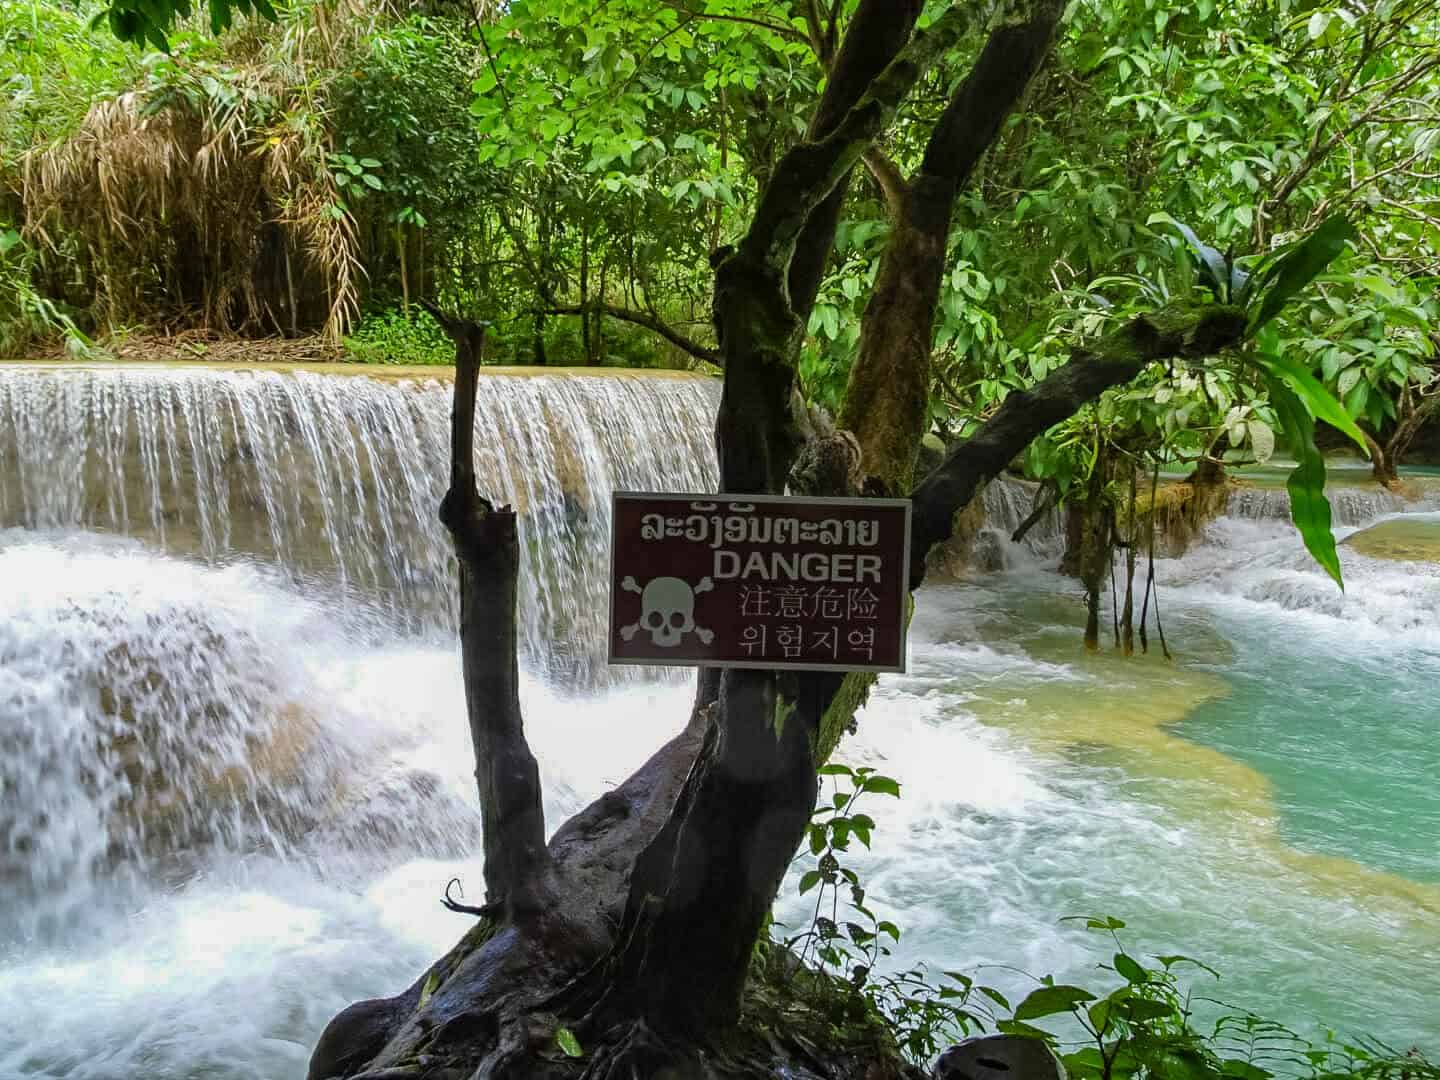 Some of the pools at Kuang Si Falls don't allow swimming. Take notice of the caution signs dotted around the site.